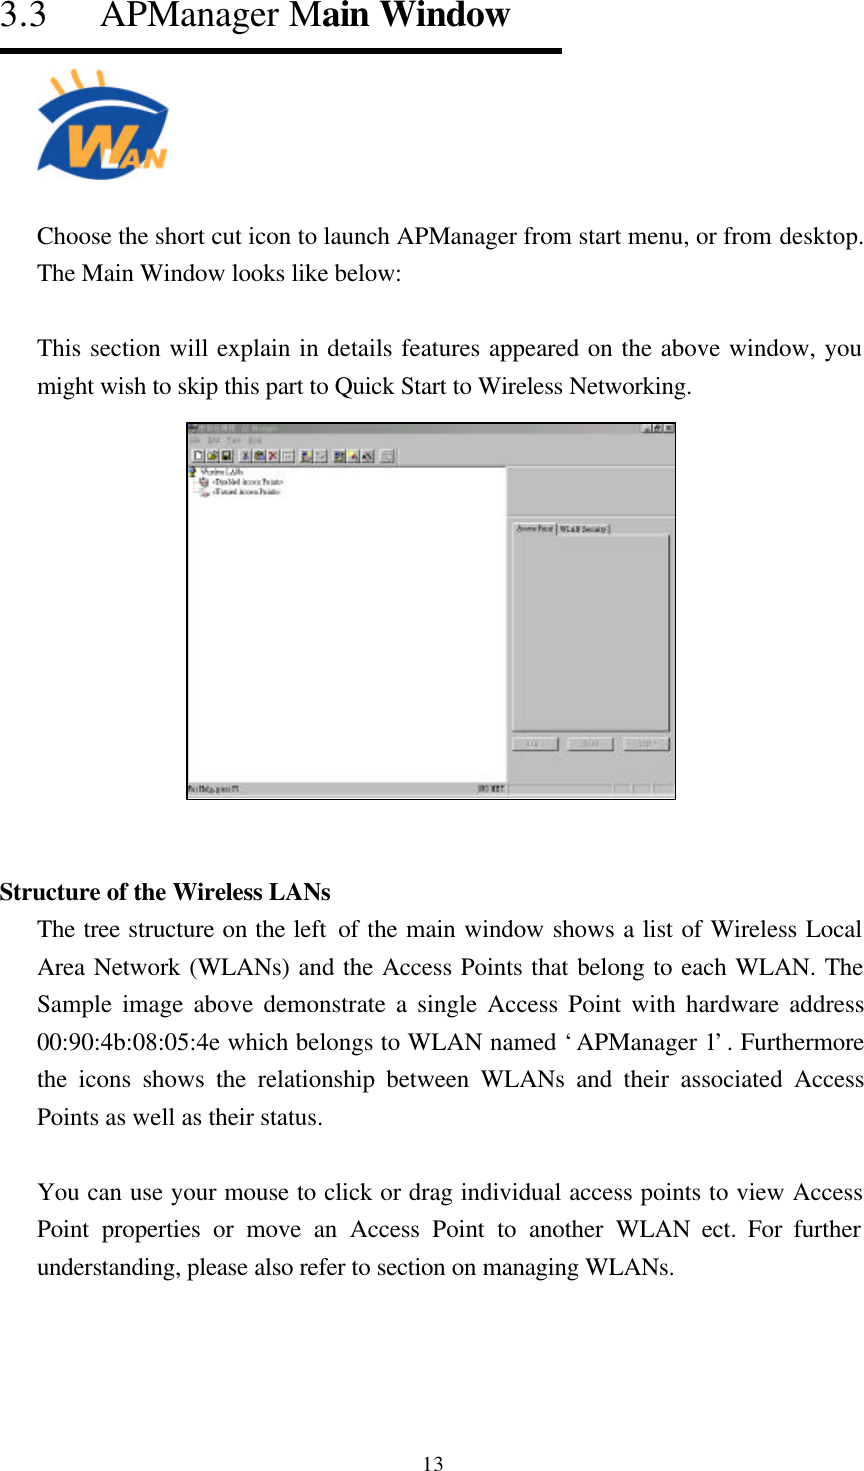  133.3   APManager Main Window  Choose the short cut icon to launch APManager from start menu, or from desktop. The Main Window looks like below:  This section will explain in details features appeared on the above window, you might wish to skip this part to Quick Start to Wireless Networking.   Structure of the Wireless LANs The tree structure on the left of the main window shows a list of Wireless Local Area Network (WLANs) and the Access Points that belong to each WLAN. The Sample image above demonstrate a single Access Point with hardware address 00:90:4b:08:05:4e which belongs to WLAN named ‘APManager 1’. Furthermore the icons shows the relationship between WLANs and their associated Access Points as well as their status.  You can use your mouse to click or drag individual access points to view Access Point properties or move an Access Point to another WLAN ect. For further understanding, please also refer to section on managing WLANs.   